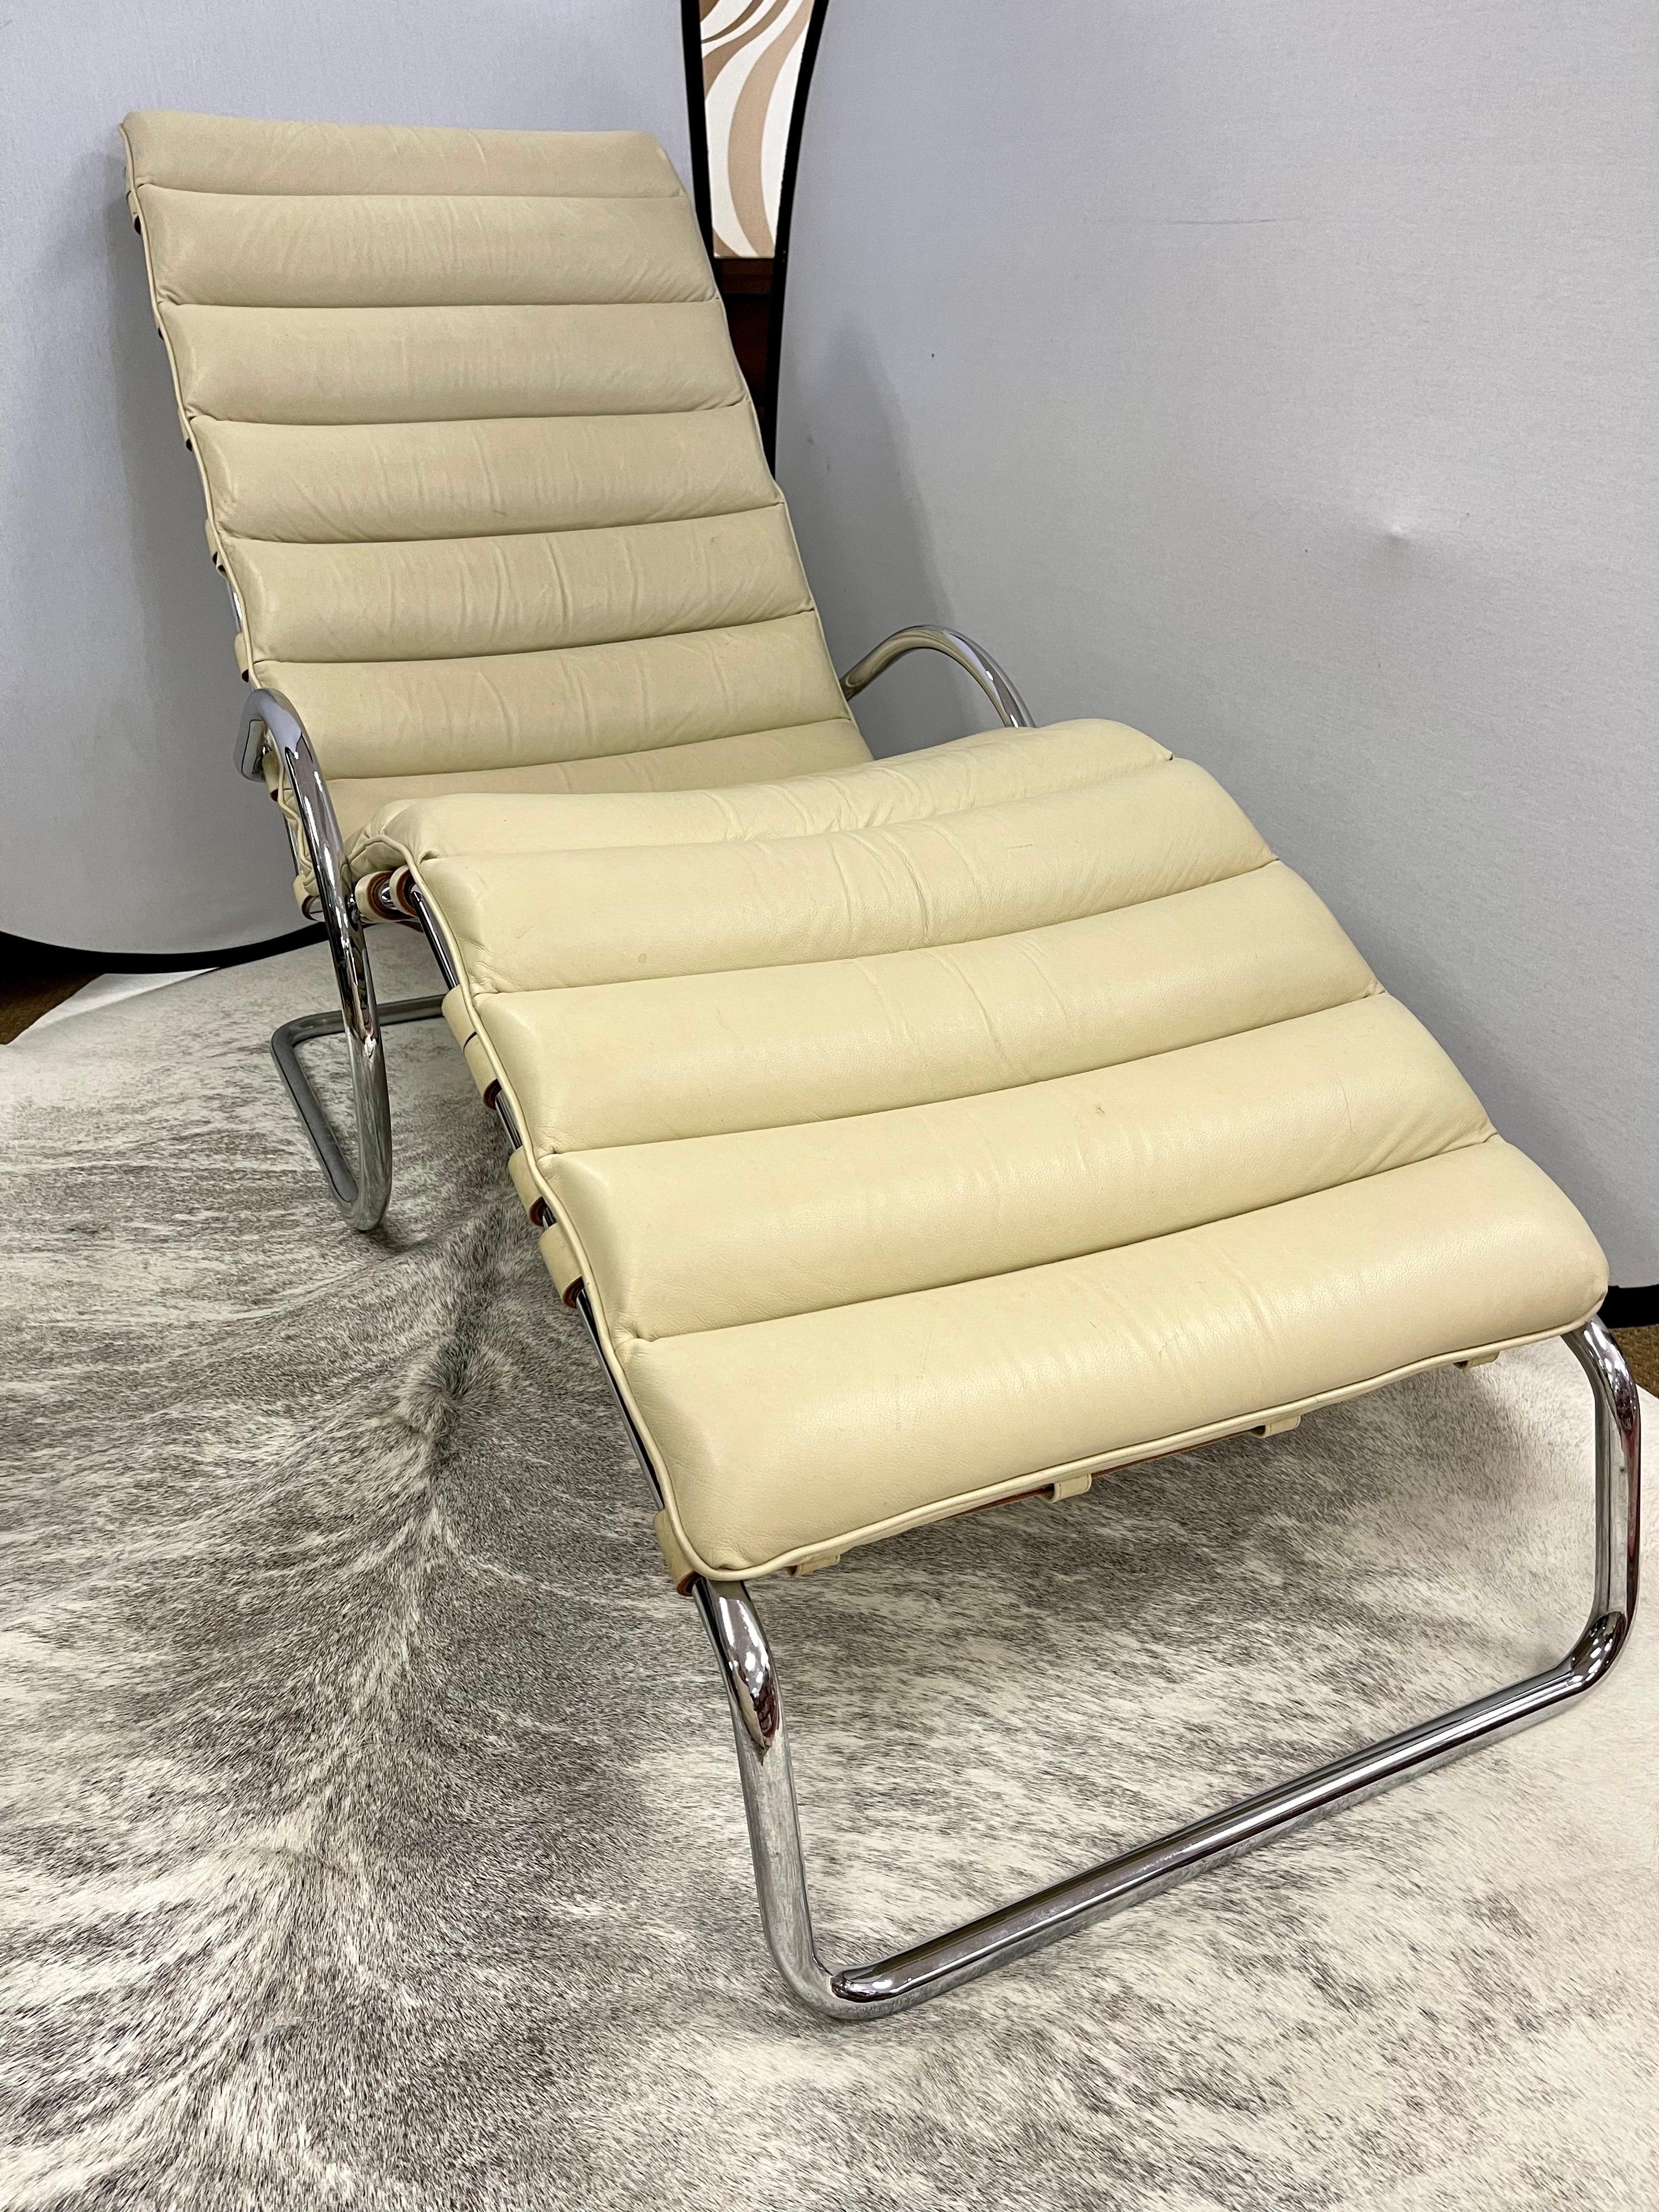 Mies van der Rohe adjustable chaise lounge for Knoll International with tubular stainless steel, polished finish with channeled Spinneybeck Volo leather. Rare color leather, note they re normally black. Adjustable.
Great lines and better scale.